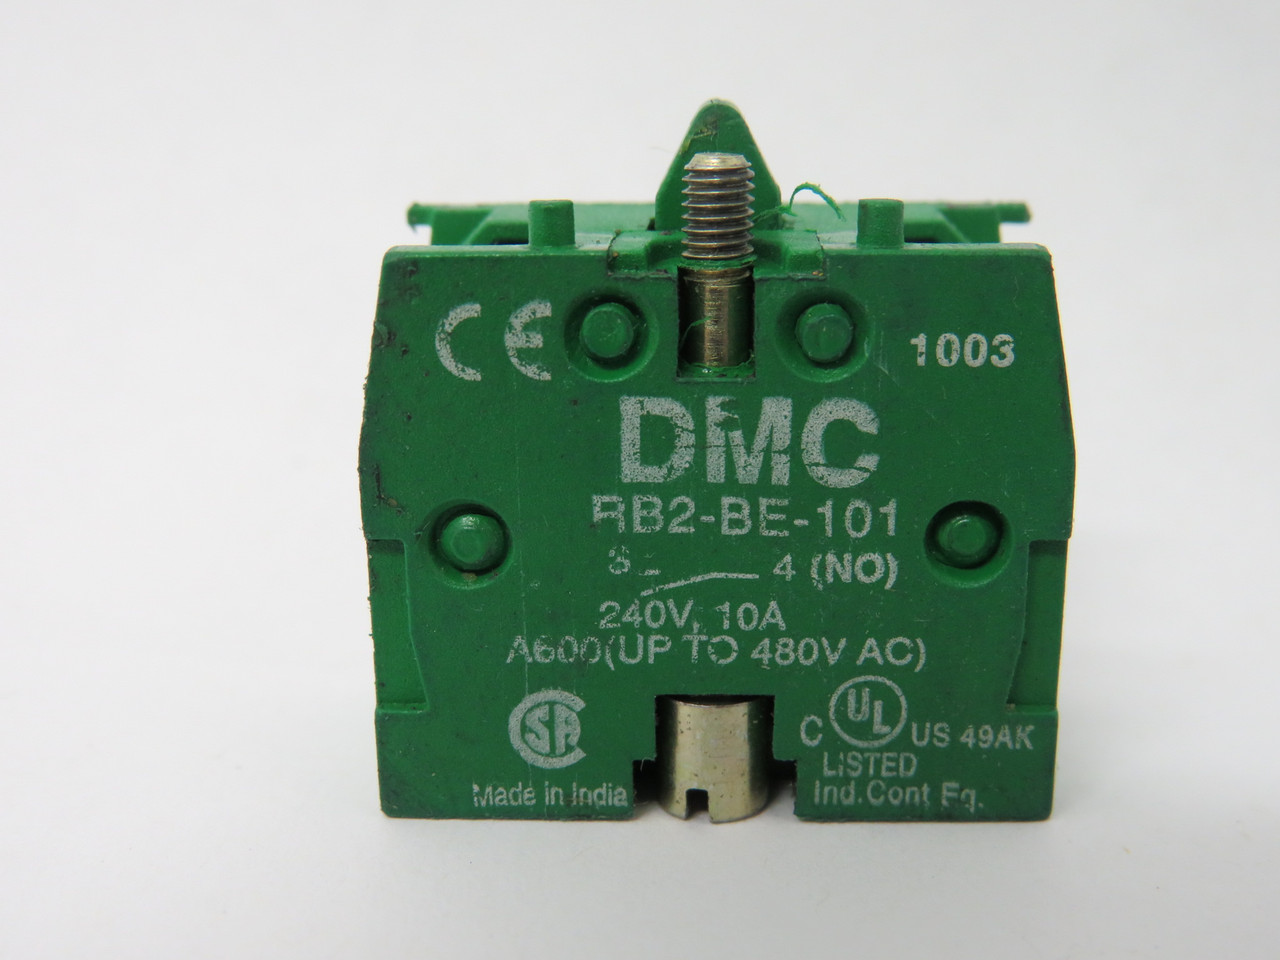 DMC RB2-BE-101 Green Push Button Contact Block 10A 240V 1NO USED